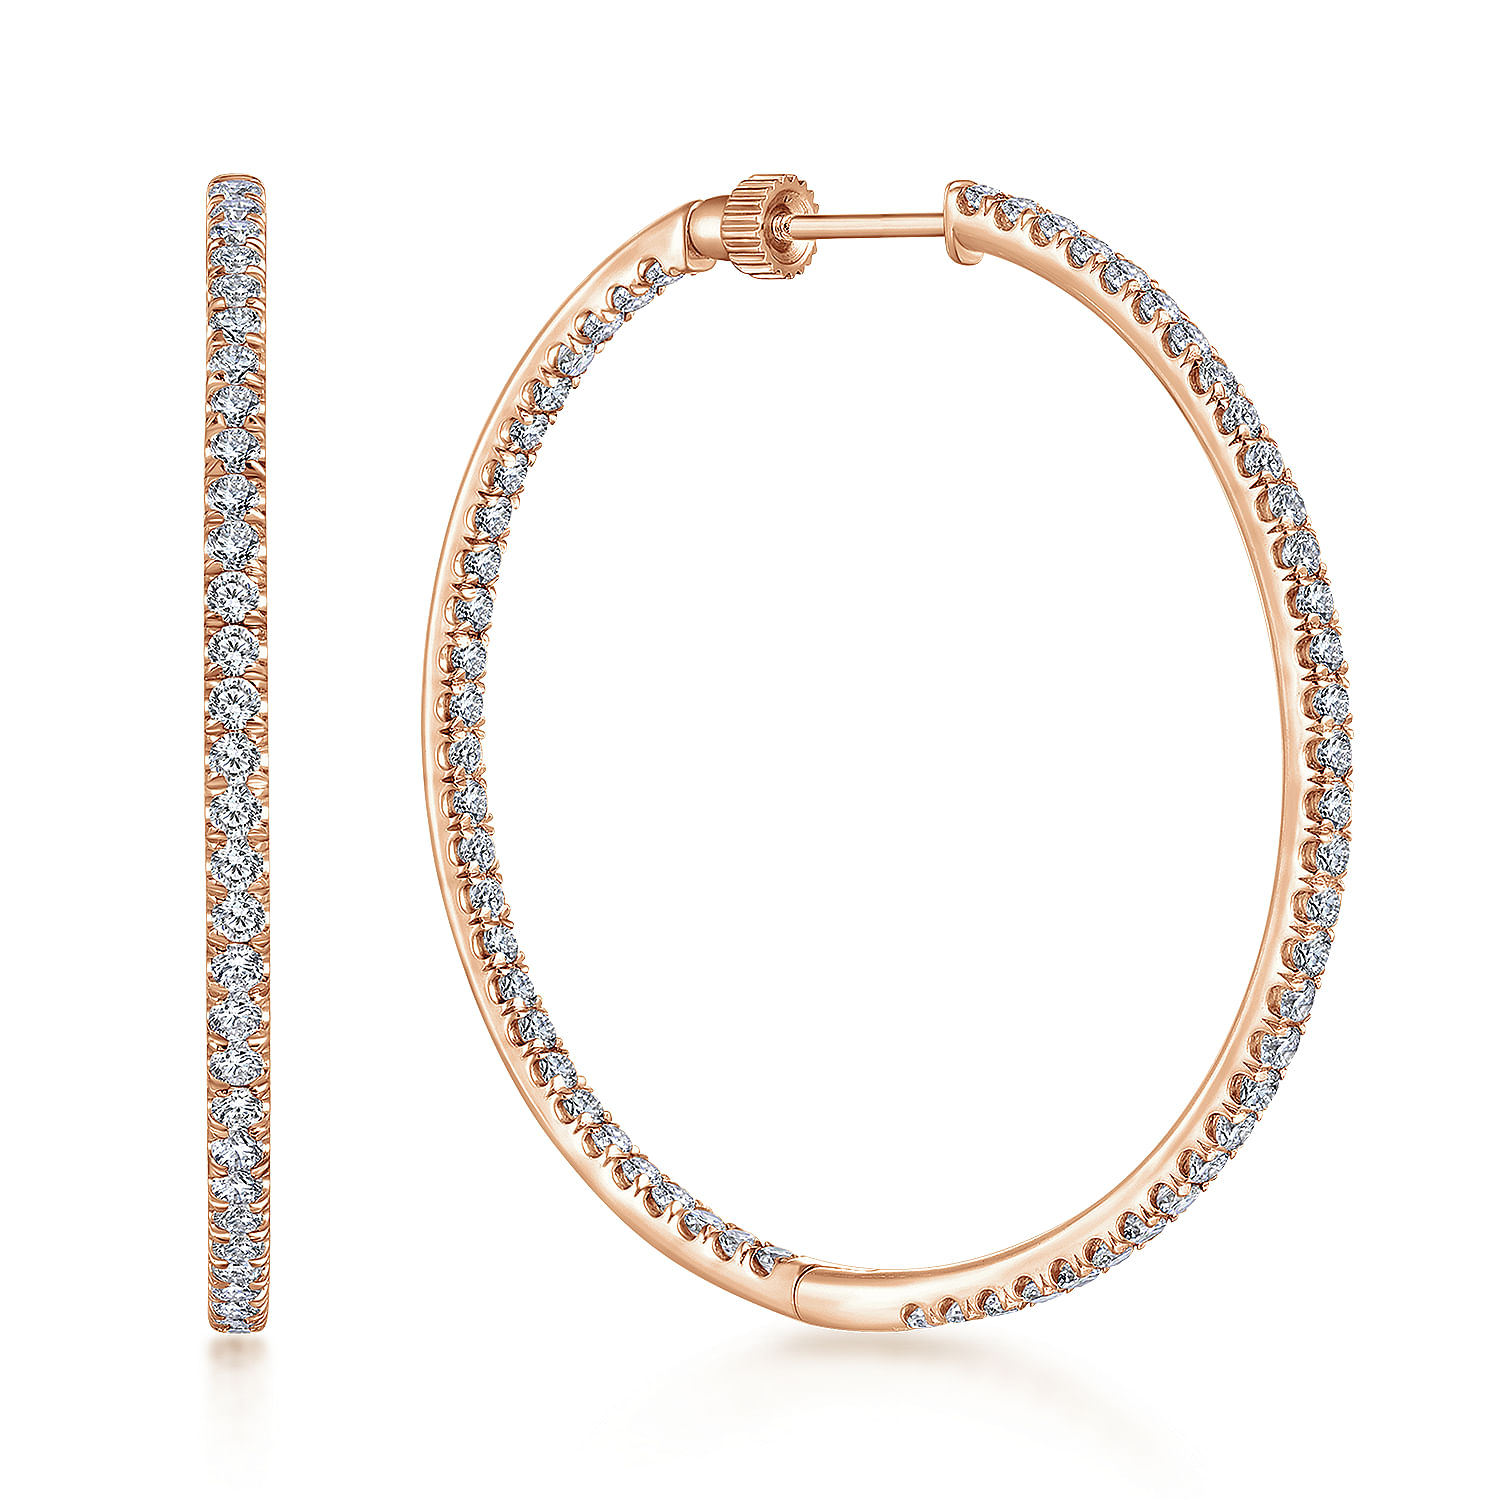 14K Rose Gold French Pave 40mm Round Inside Out Diamond Hoop Earrings